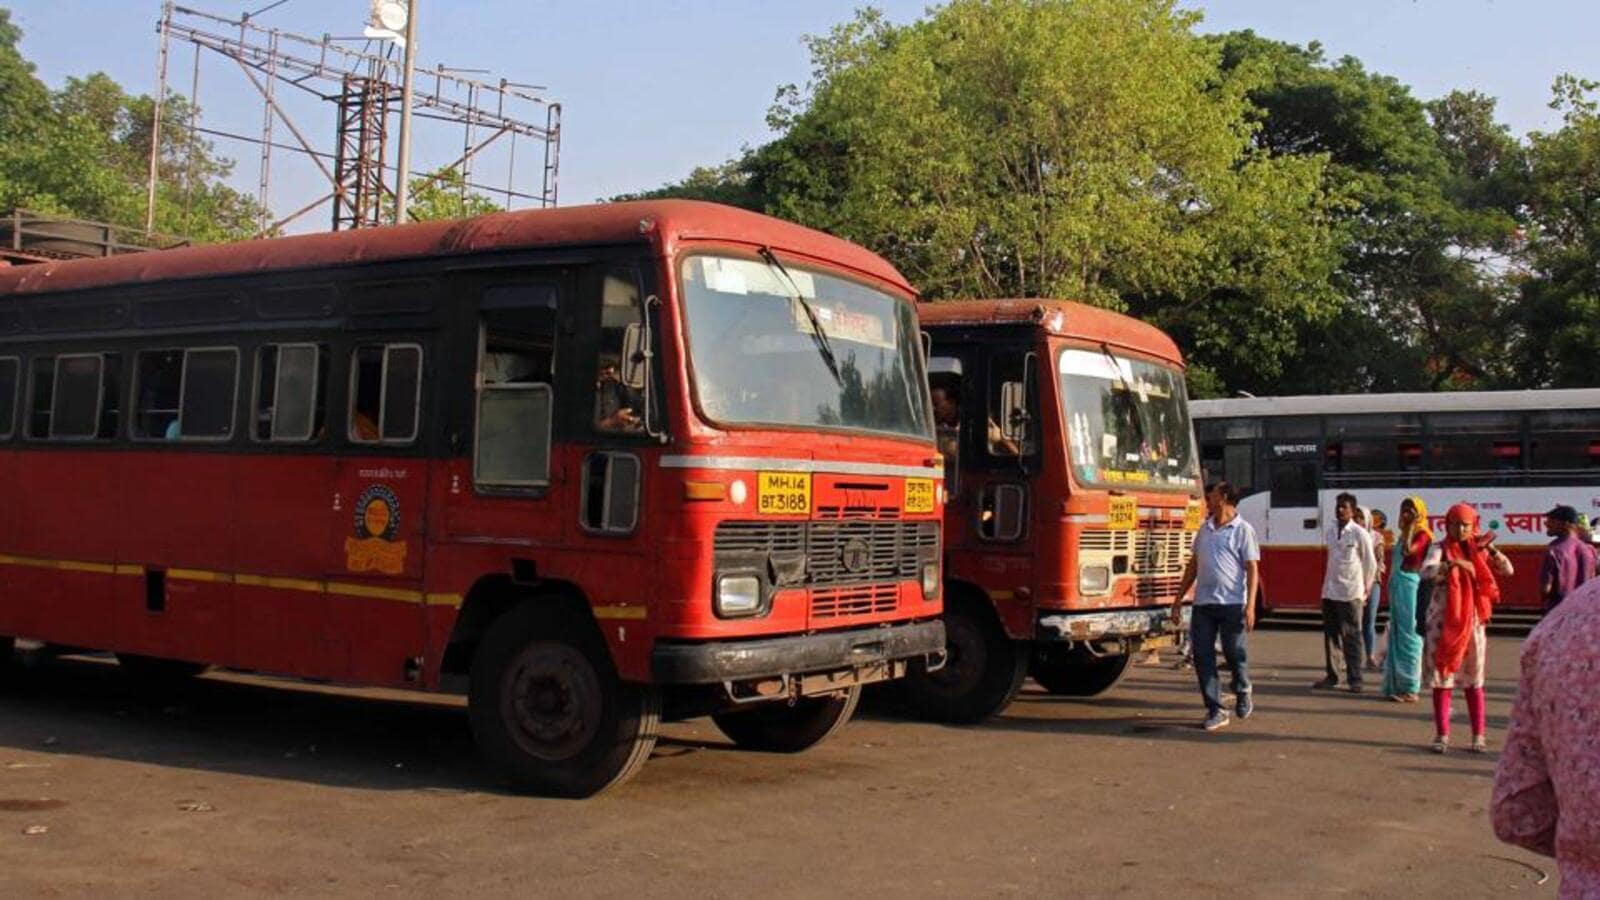 MSRTC to add over 7,000 new buses to its fleet | Mumbai news ...